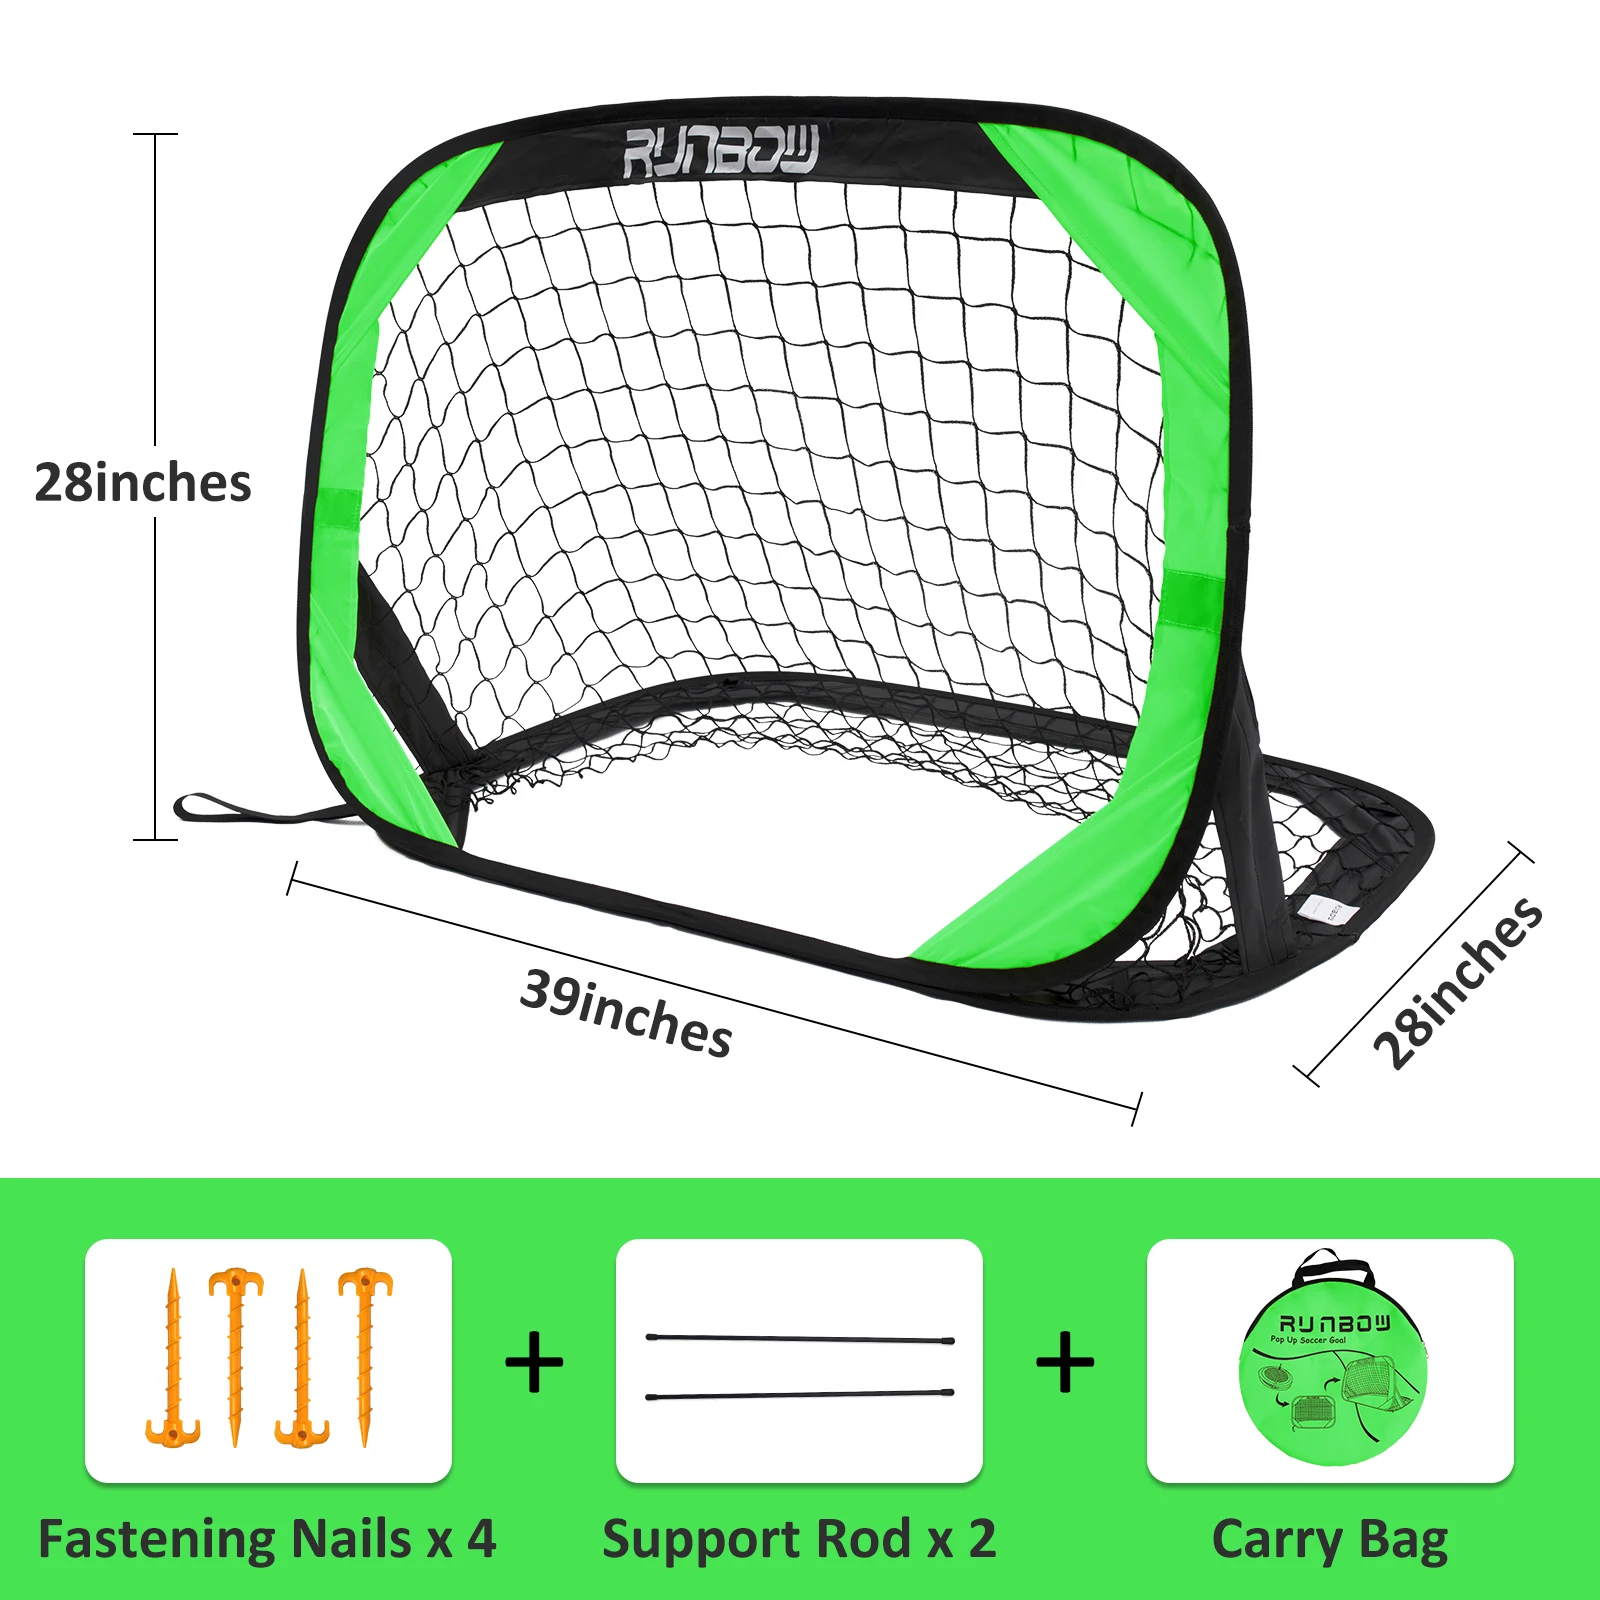 

RUNBOW 3.3x2.2FT Pop Up Soccer Goal for Kids- Portable Toddler Soccer Net for Backyard Outdoor Indoor and Beach with Carry Bag